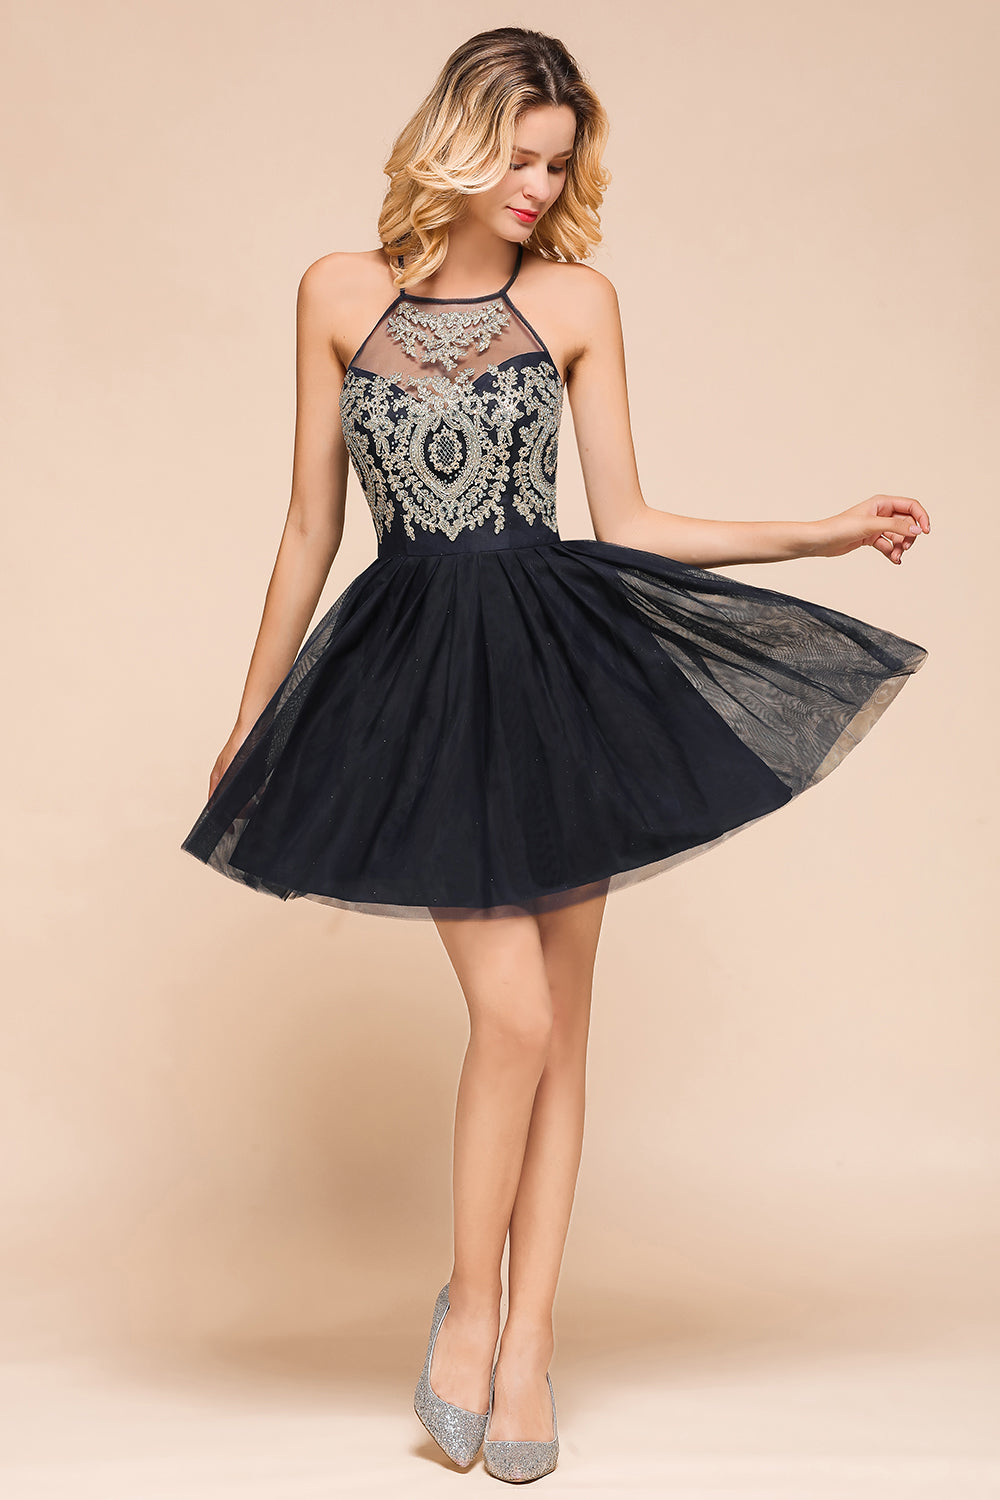 Lovely Halter Tulle Short Prom Dress Lace Appliques Homecoming Dress Online